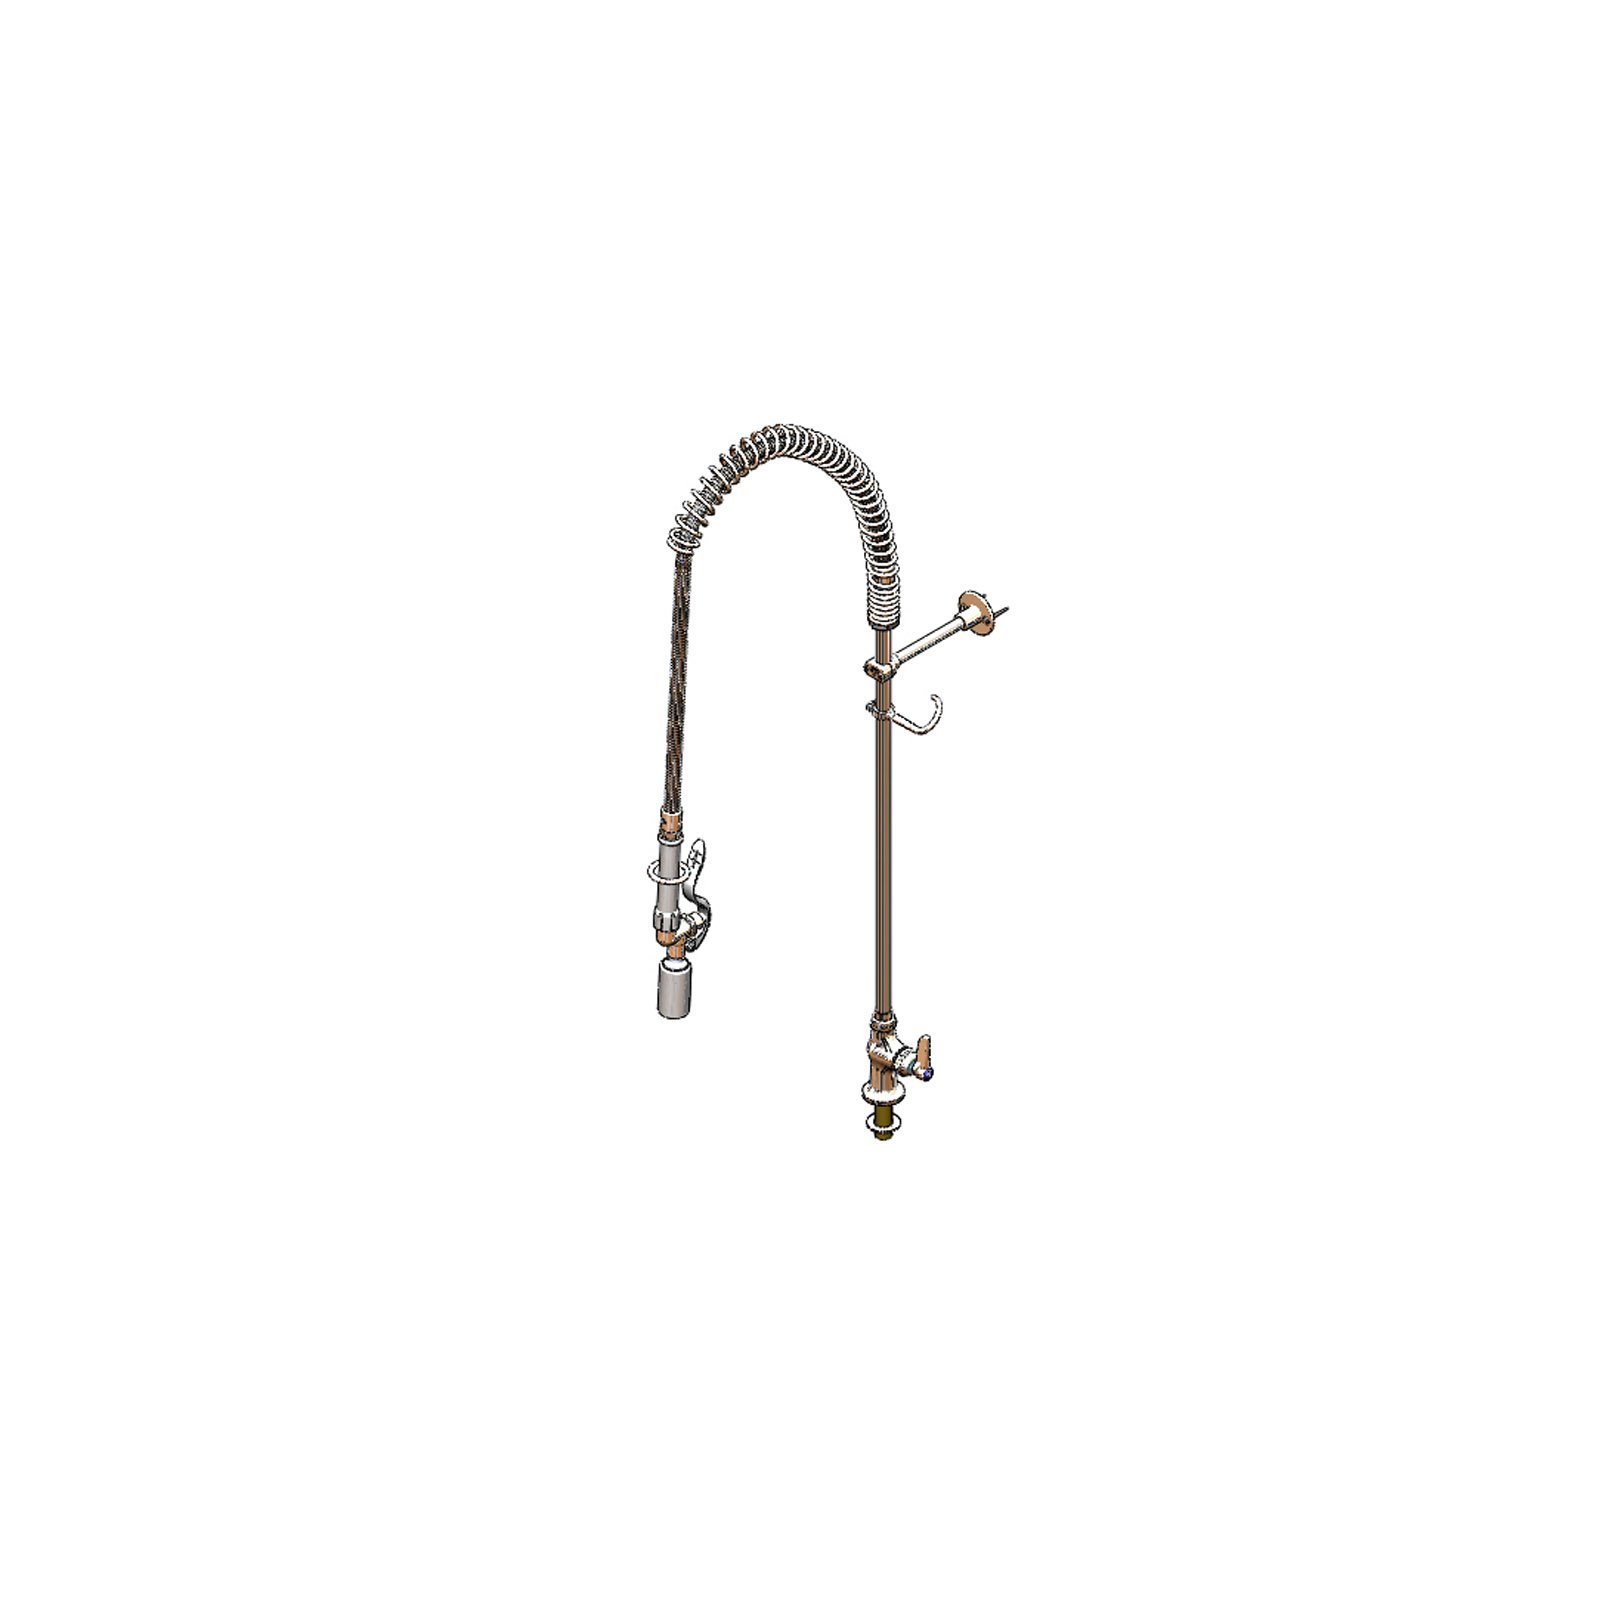 T&S Brass B-2285-BC Pre-Rinse Faucet Assembly